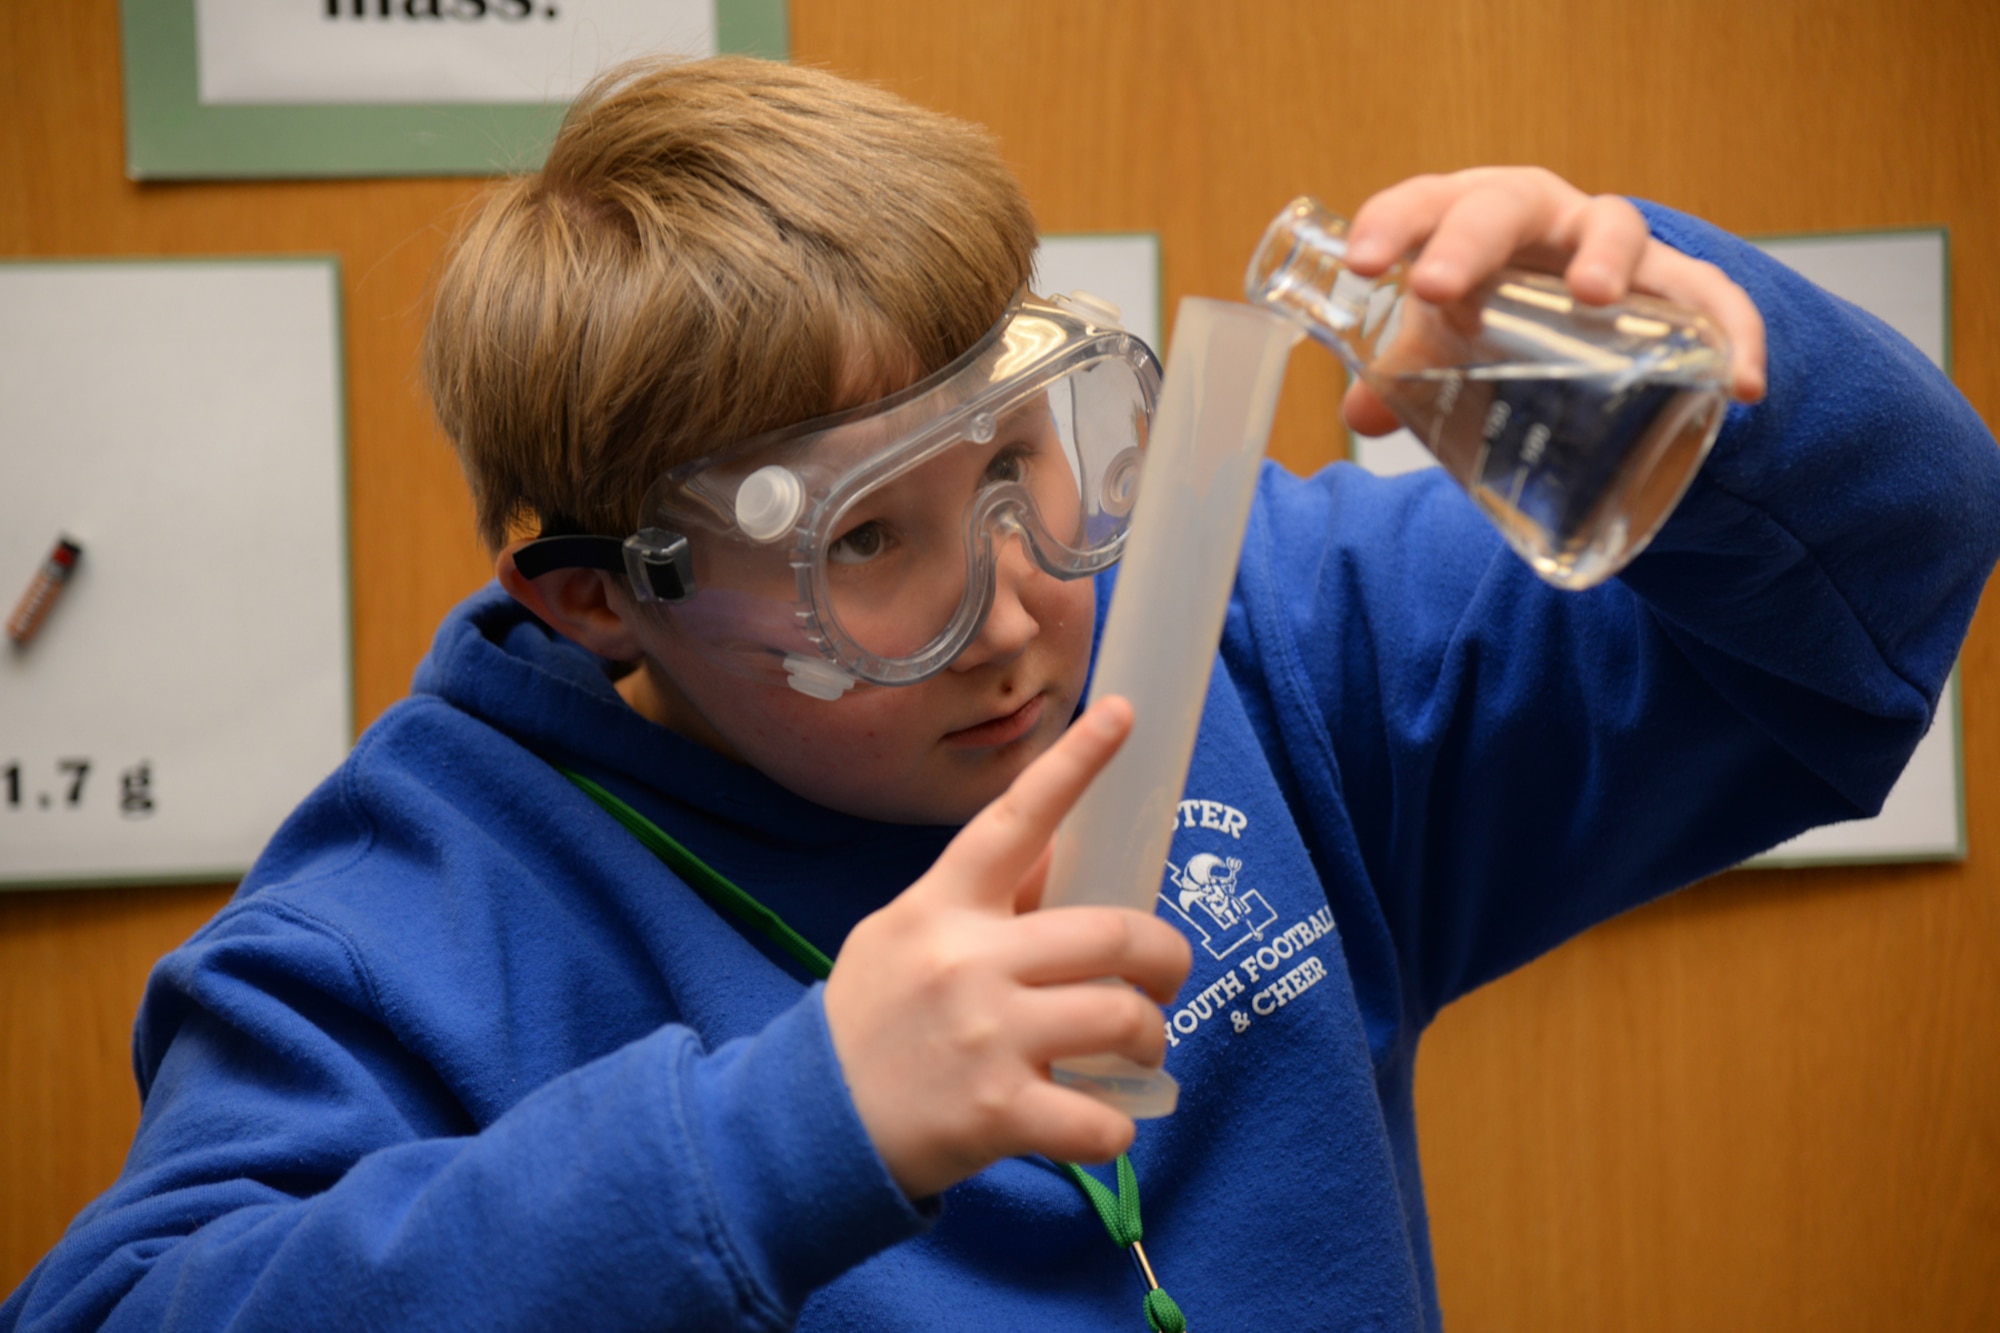 Caleb Roberts, age 10, a fifth grader from Leominster, Mass., carefully measures fluid for a rocket experiment at Hanscom's STARBASE center, March 20. Roberts was among a small group of students who visited STARBASE to learn about STEM. A CBS news crew was also on hand to interview Roberts and others as part in a larger "Eye on Education" series focusing on state-wide education initiatives. (U.S. Air Force photo by Linda LaBonte-Britt)